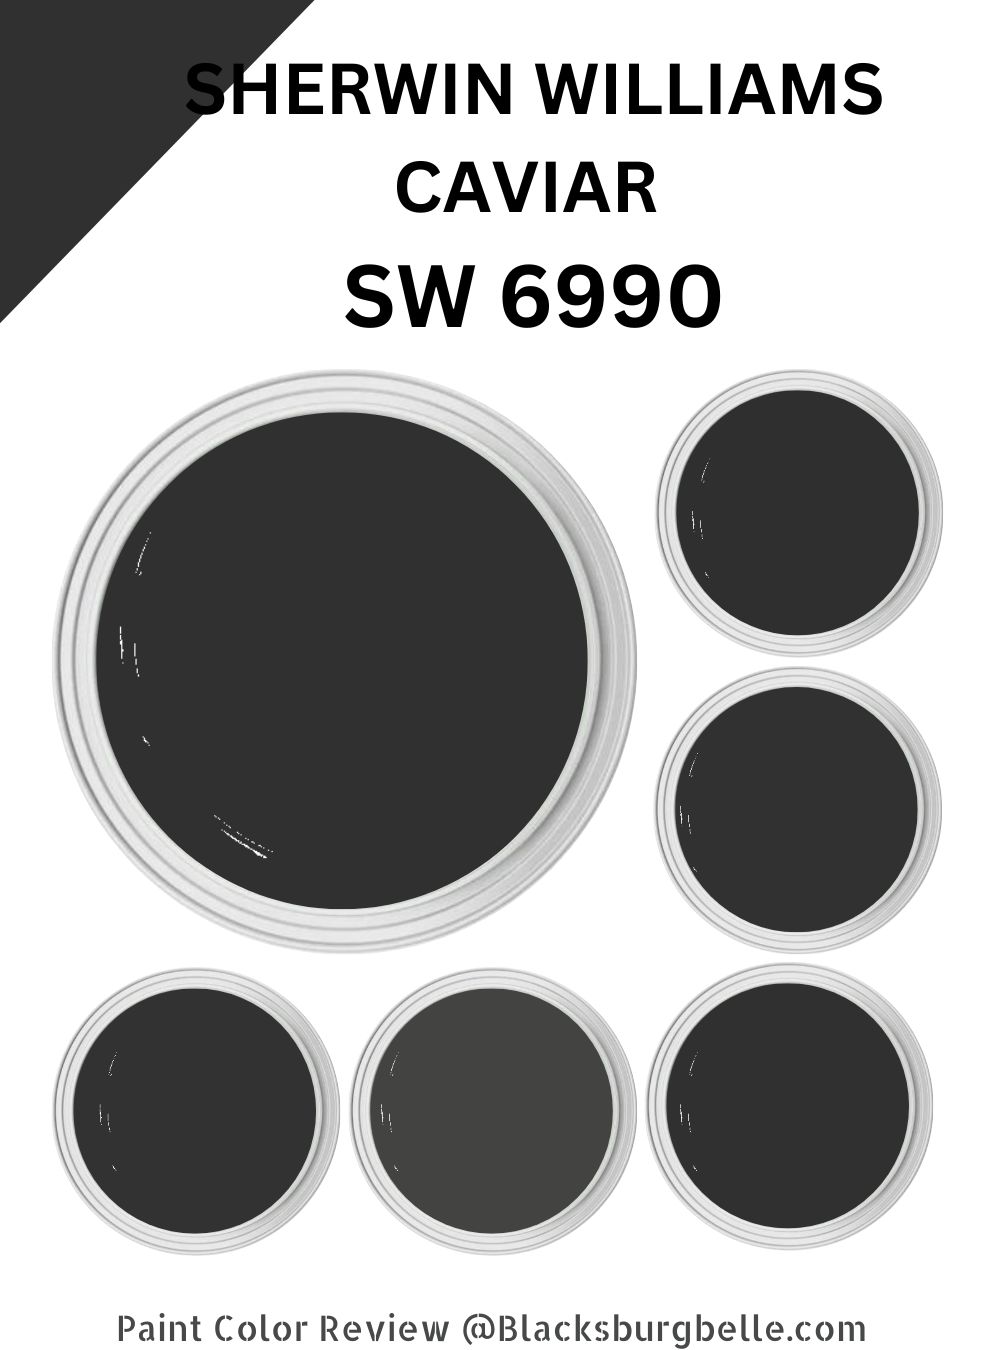 Sherwin Williams Caviar (SW 6990) Paint Color Review & Pics